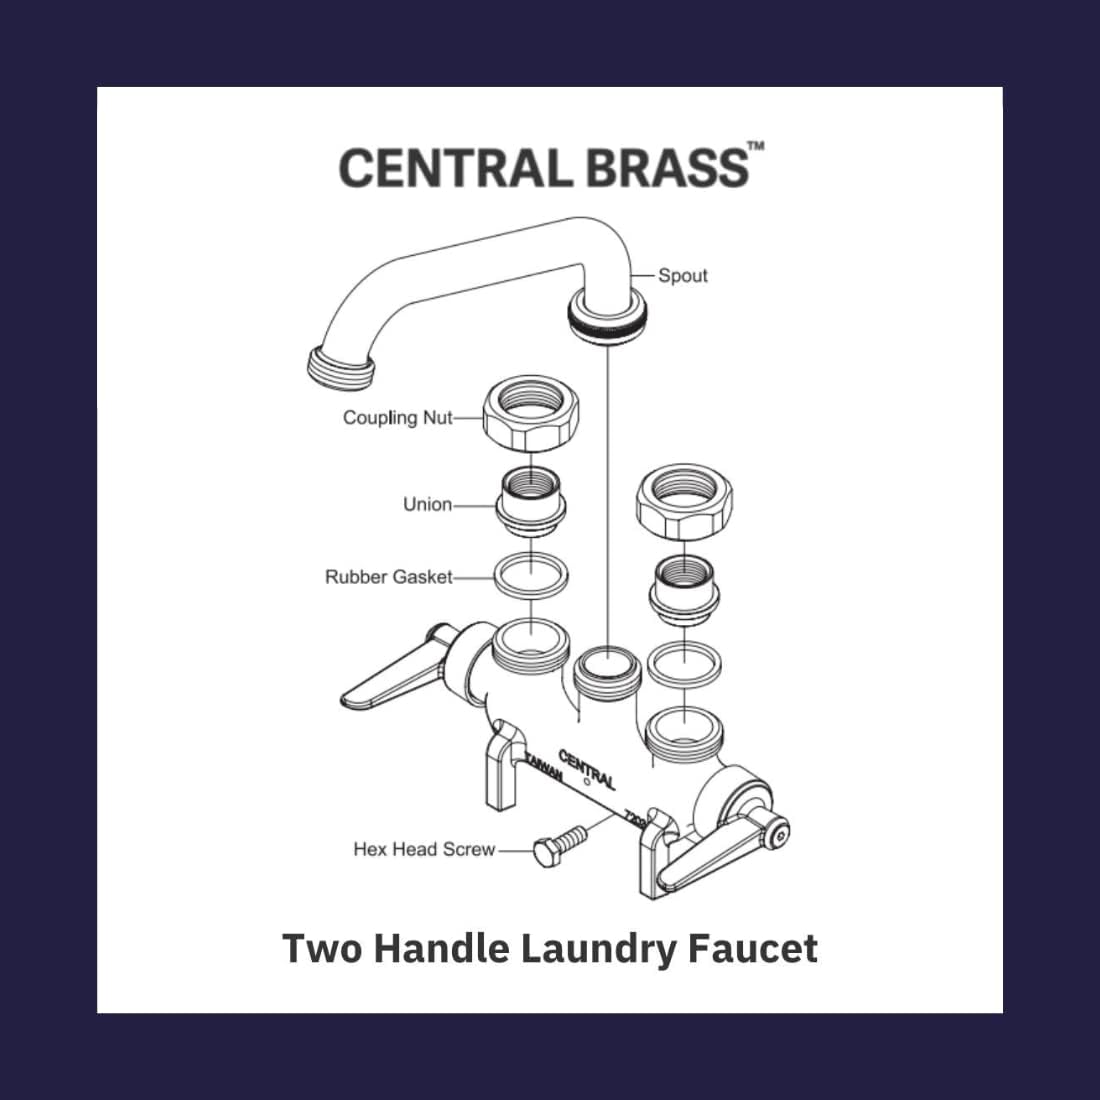 Central Brass Two Handle Laundry Faucet Heavy Duty Rough Brass 6" Reach Tube Swivel Spout, 0465